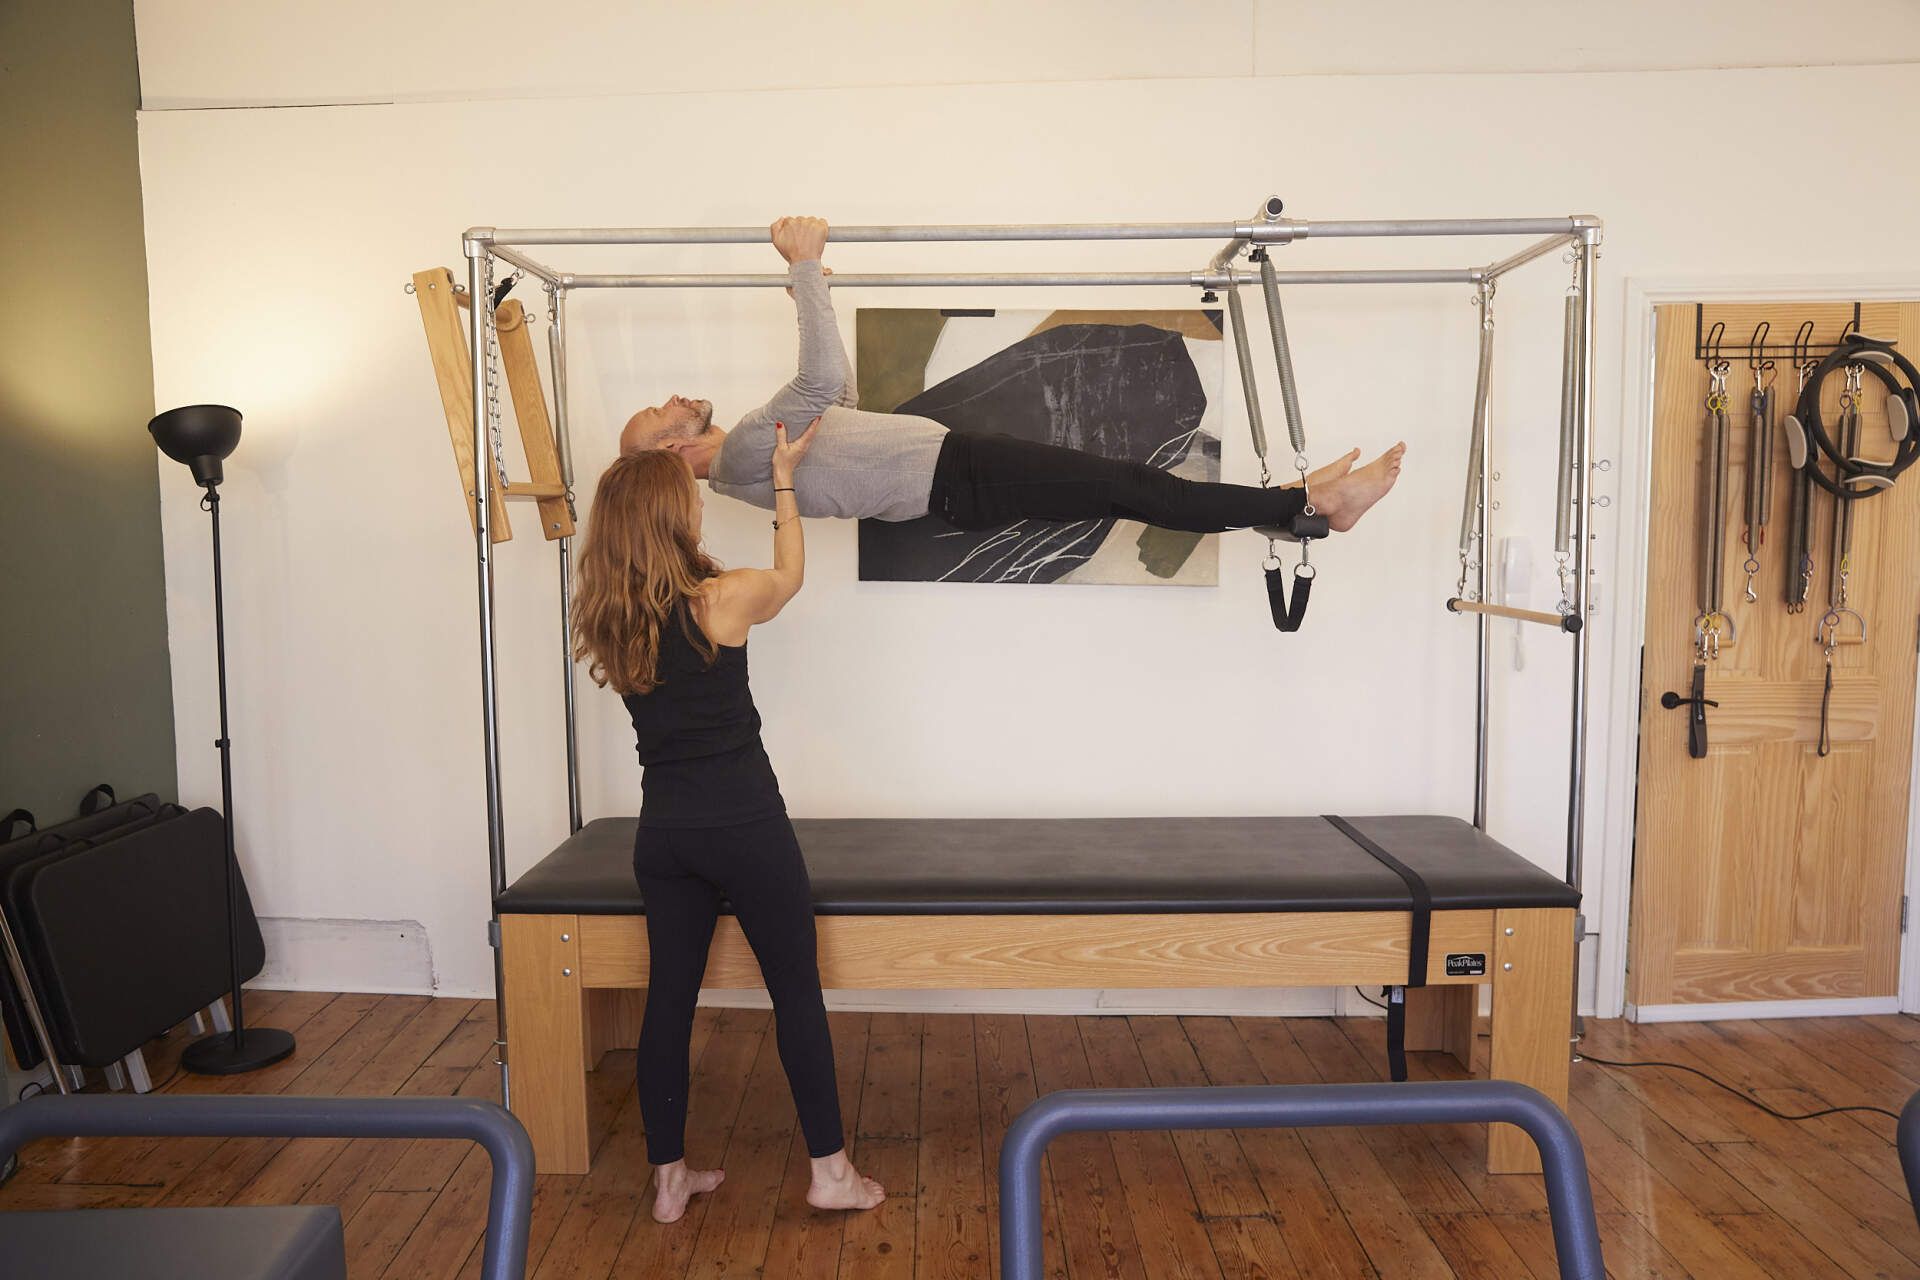 A Pilates teacher stands next to a Tower machine, assisting a student who is holding on the to the Tower in a horizontal pose